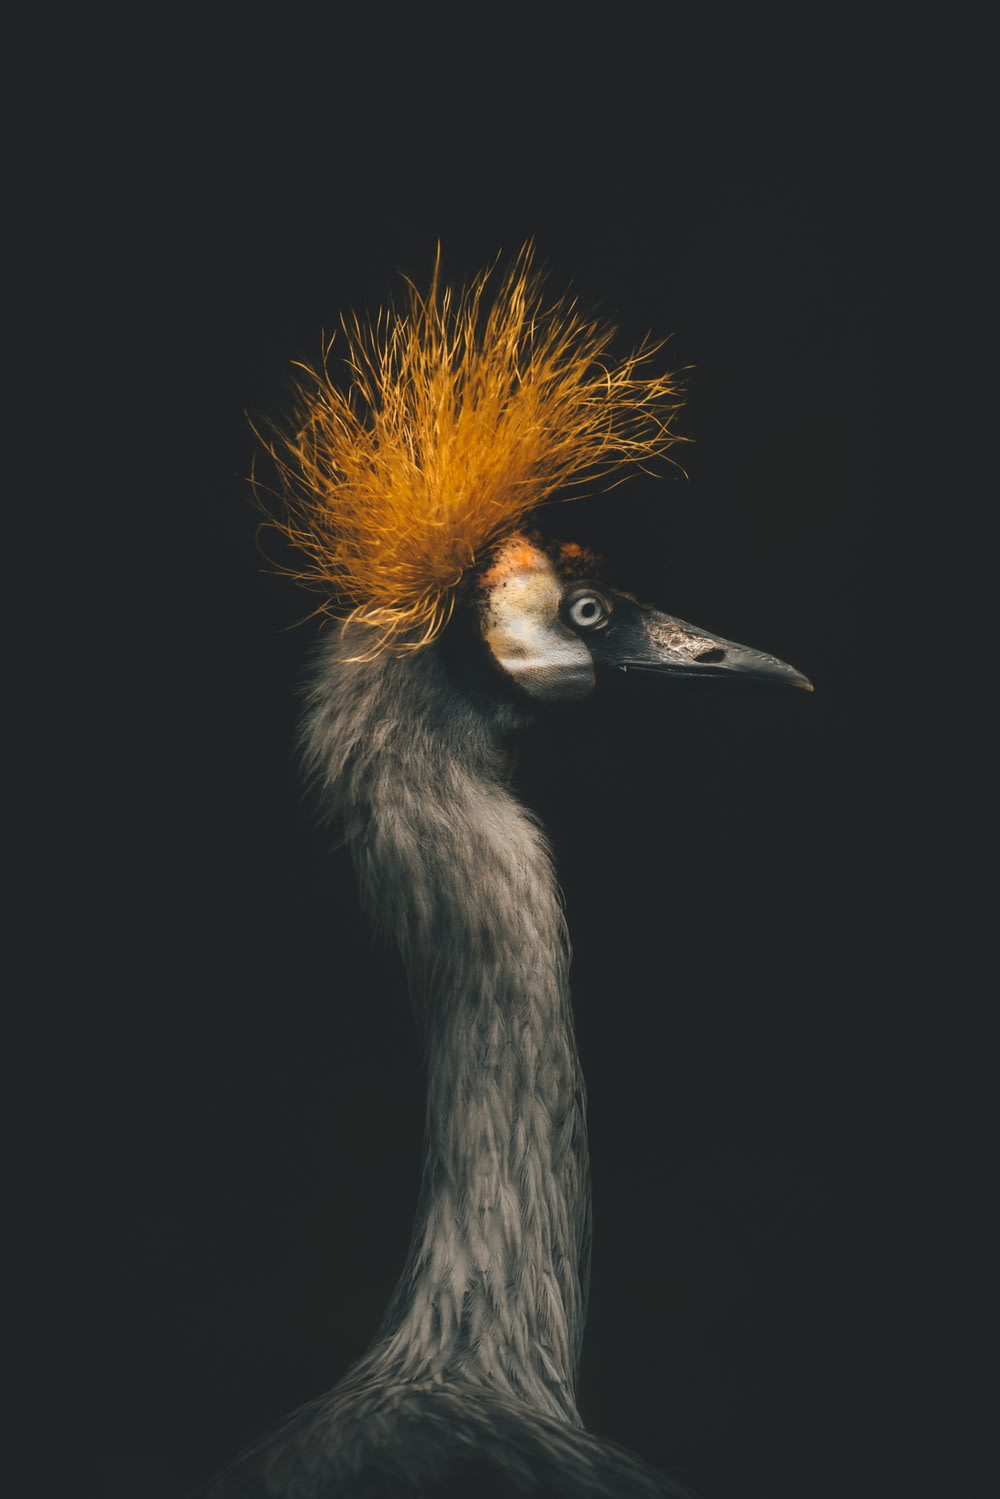 a bird with a yellow mohawk on its head